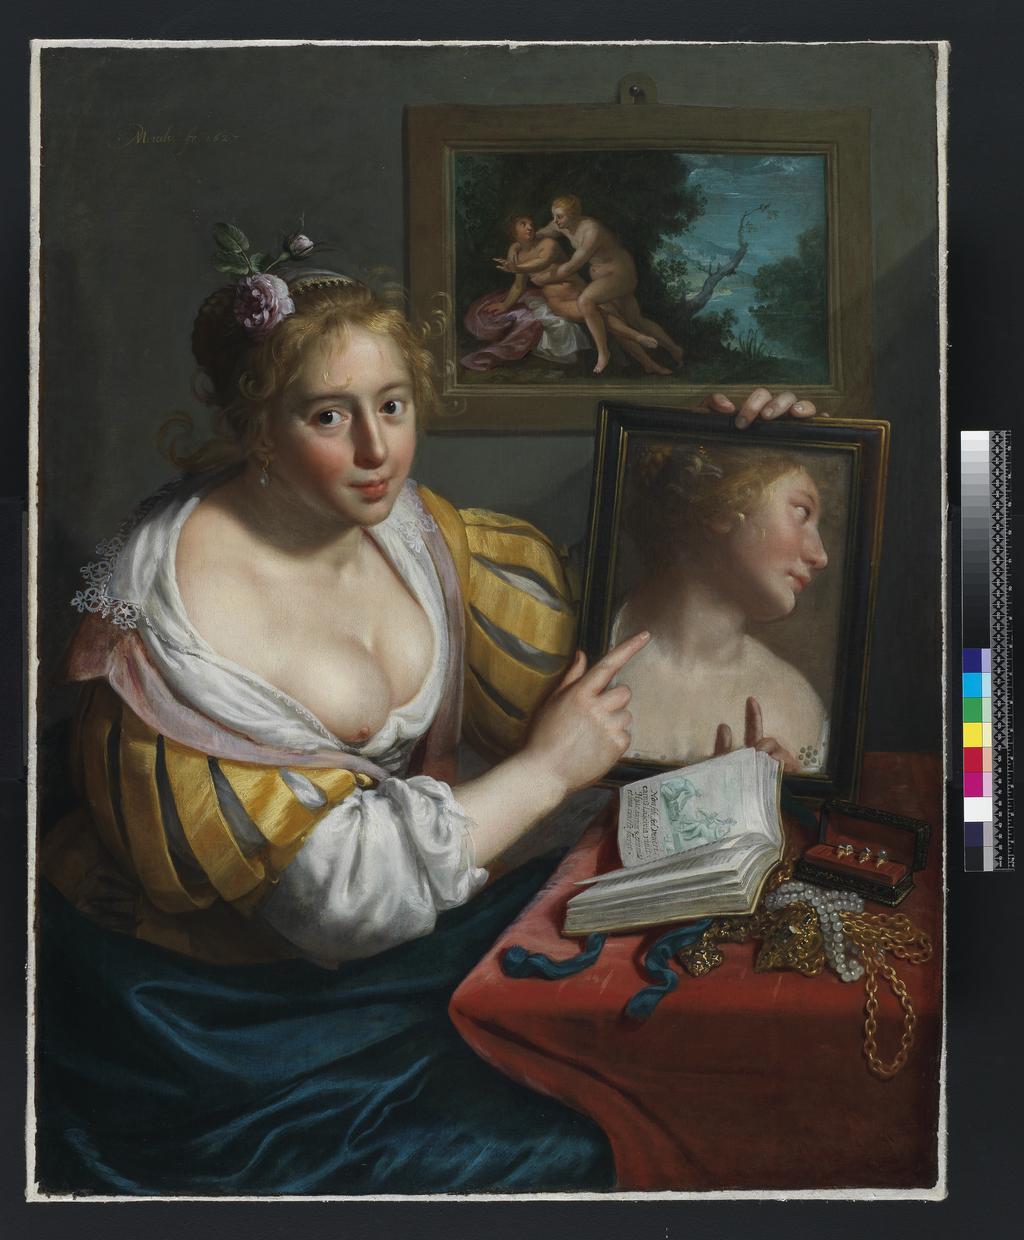 An image of A girl with a mirror, an allegory of Profane Love. Moreelse, Paulus (Dutch, 1571-1638). Oil on canvas, height 105.5 cm, width 83 cm, 1627.